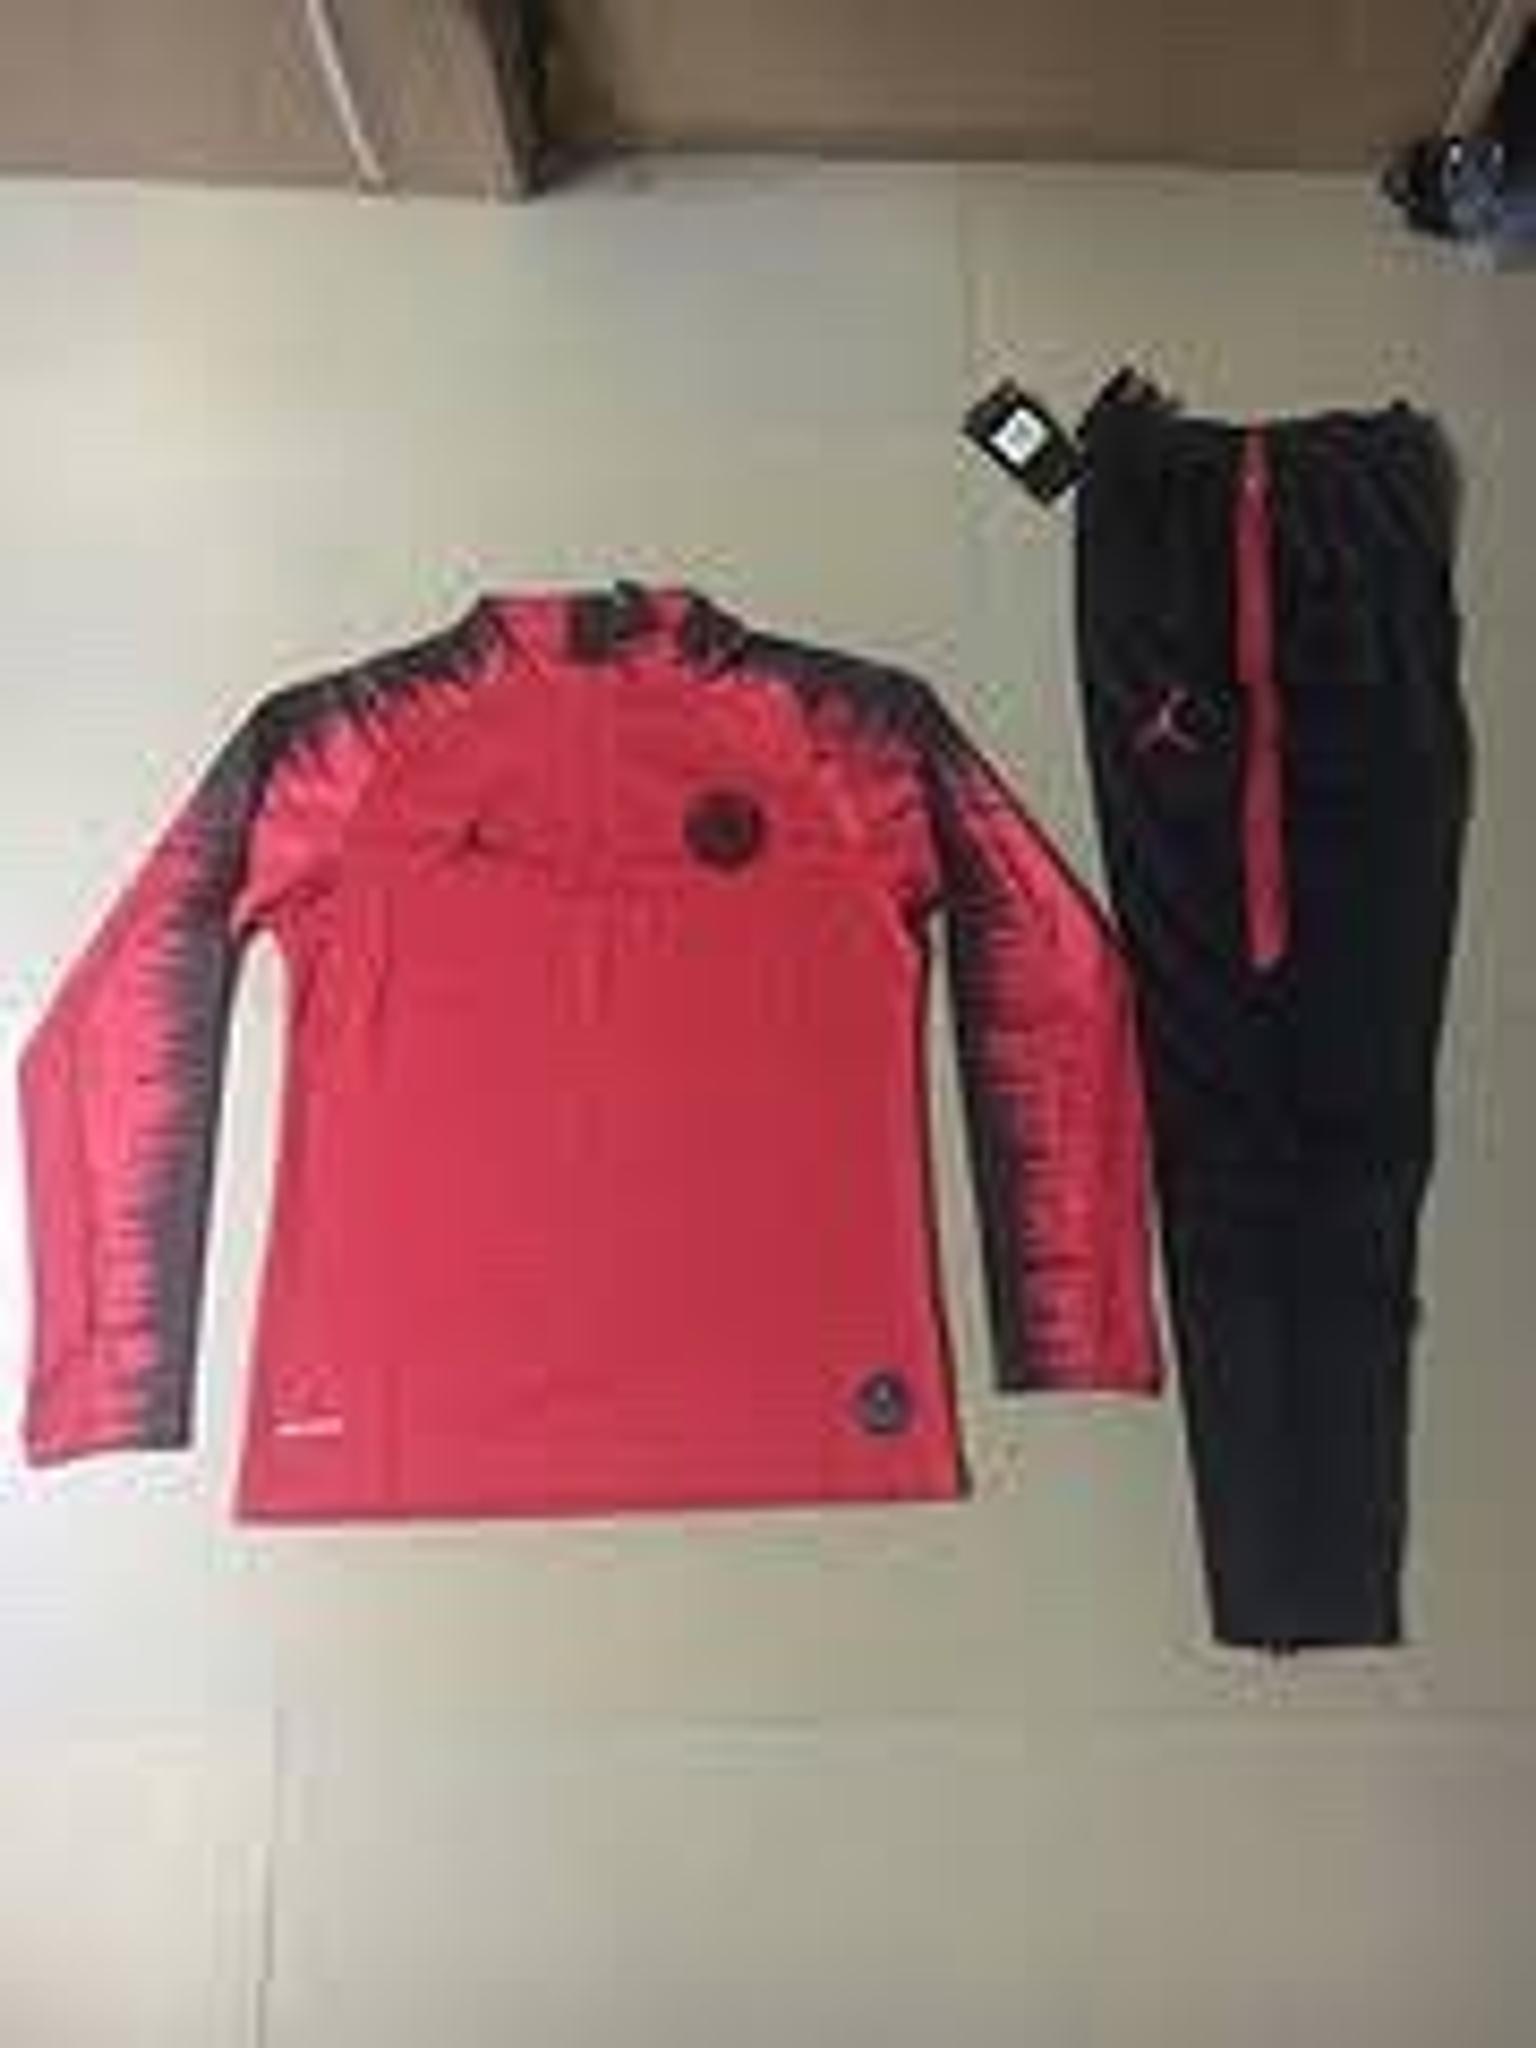 red psg tracksuit